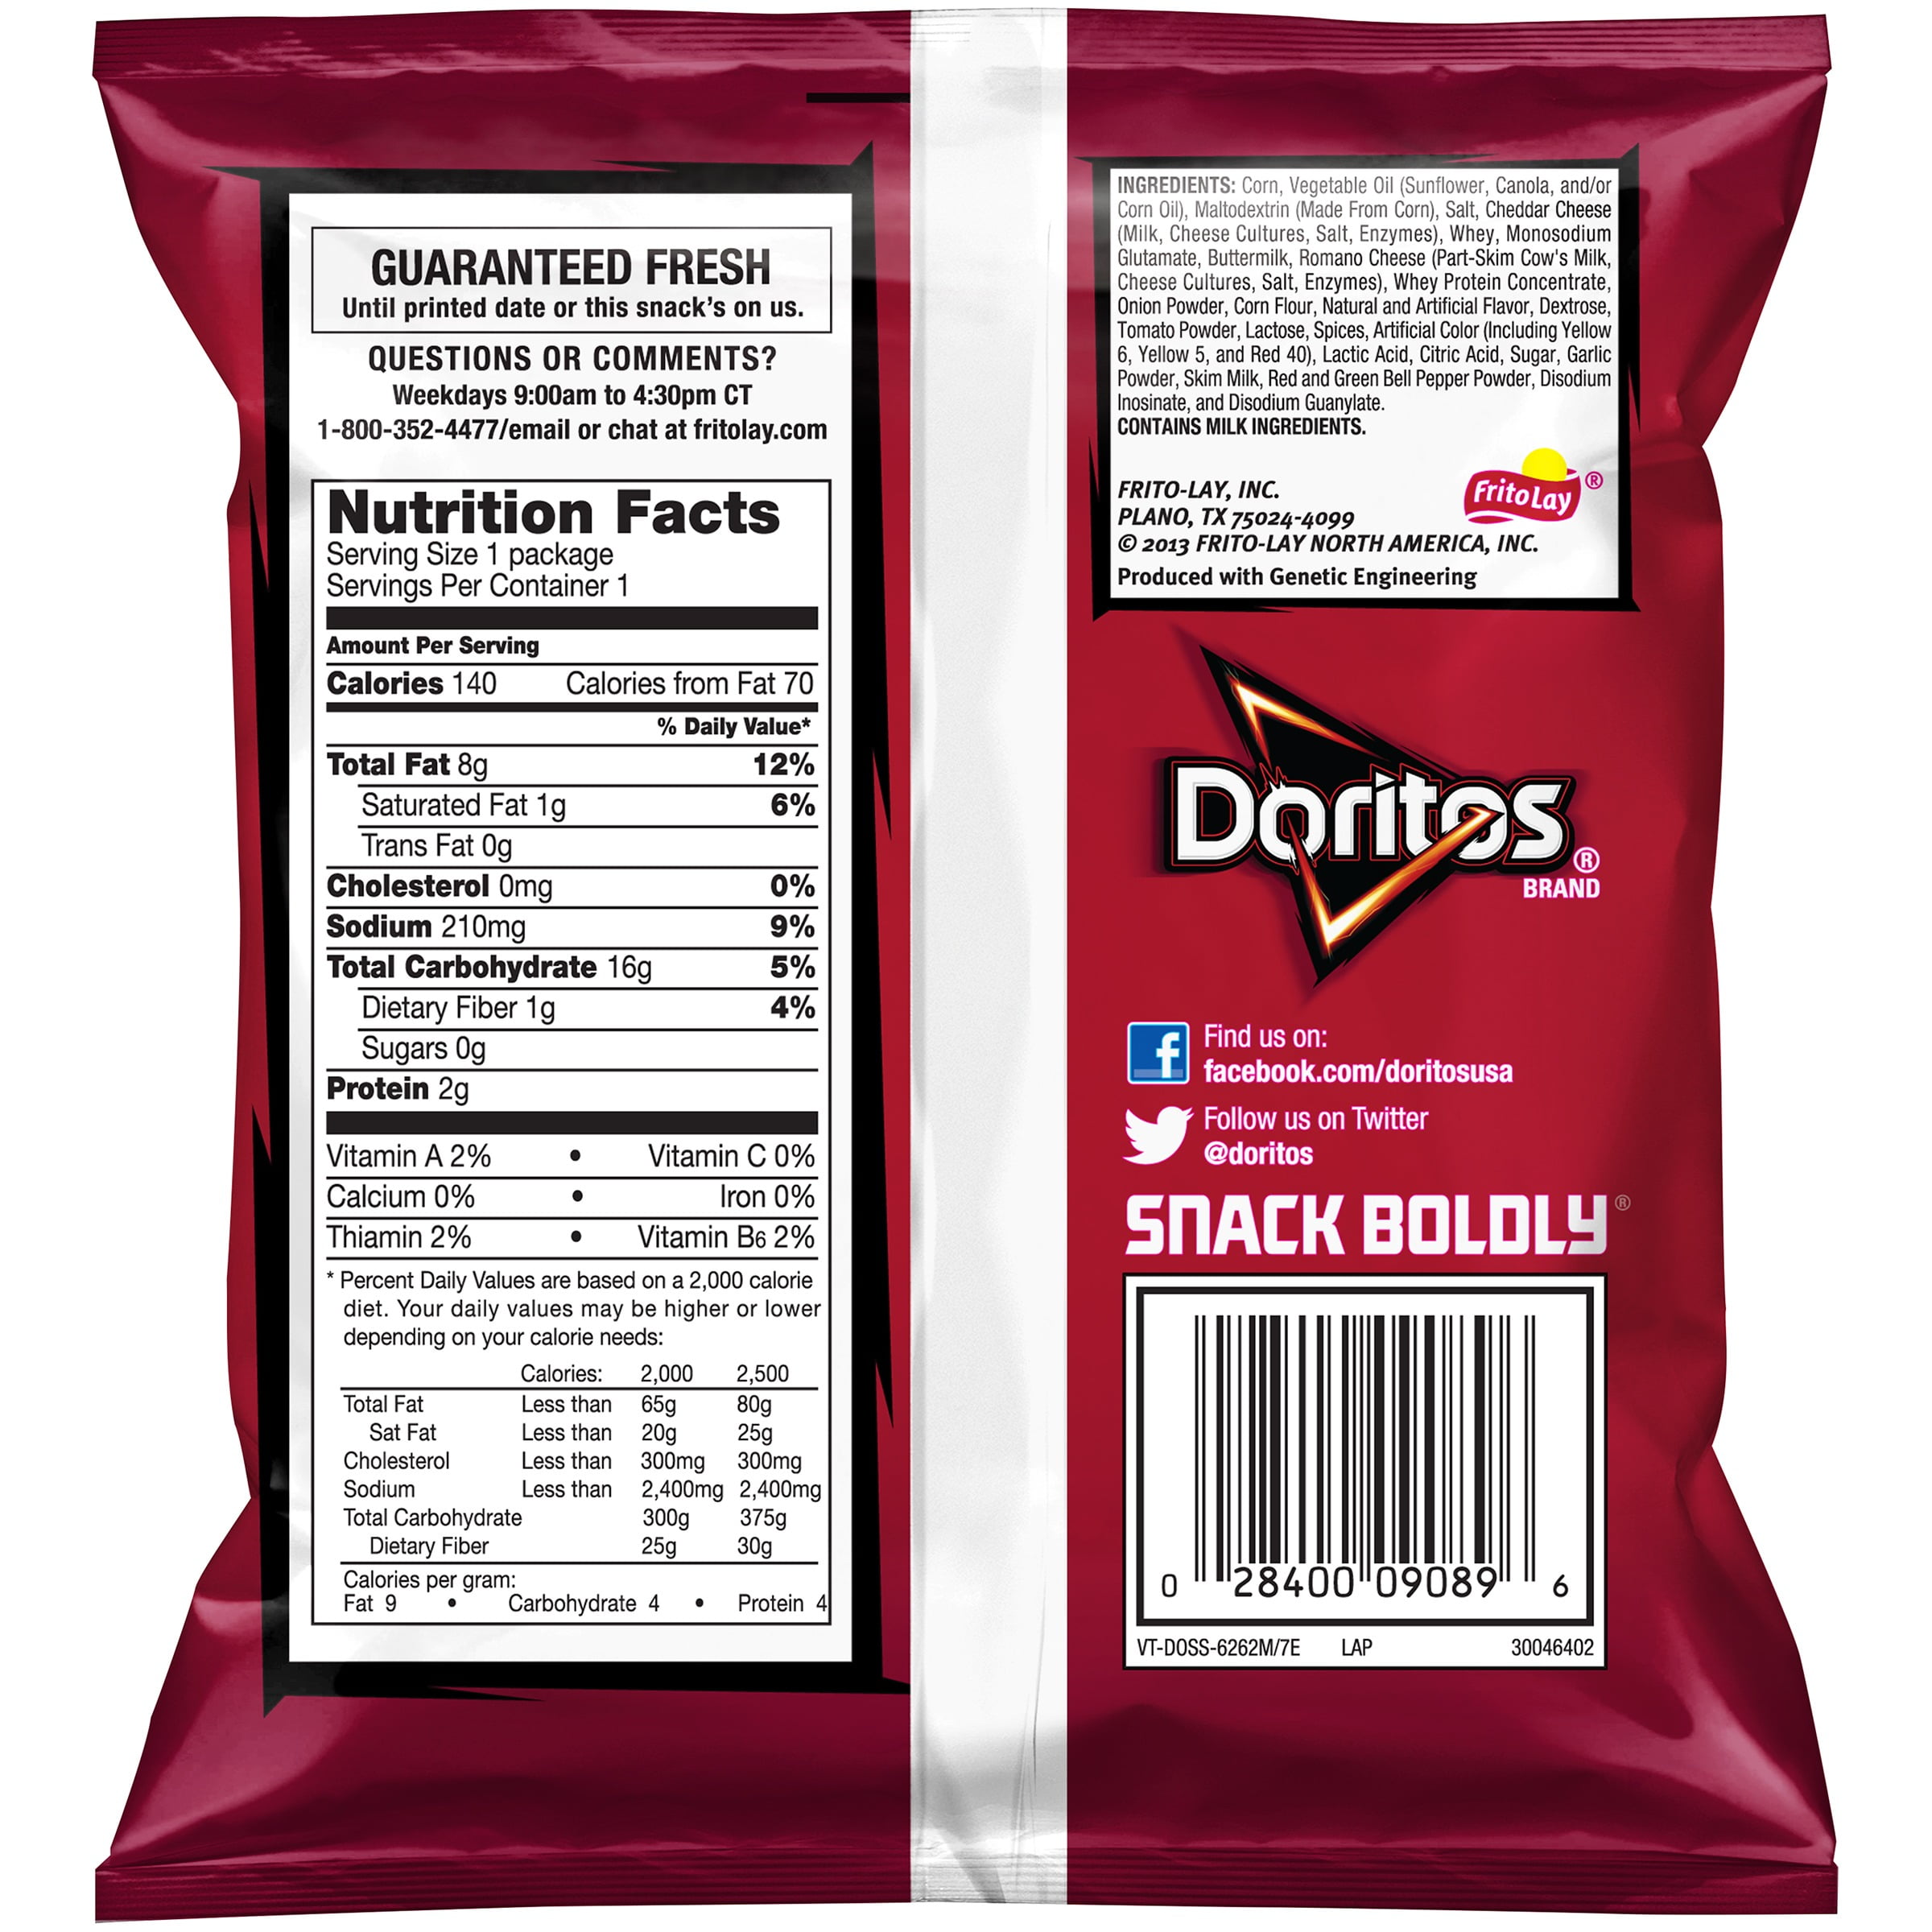 30 Nutrition Label For Cheetos - Labels Database 2020